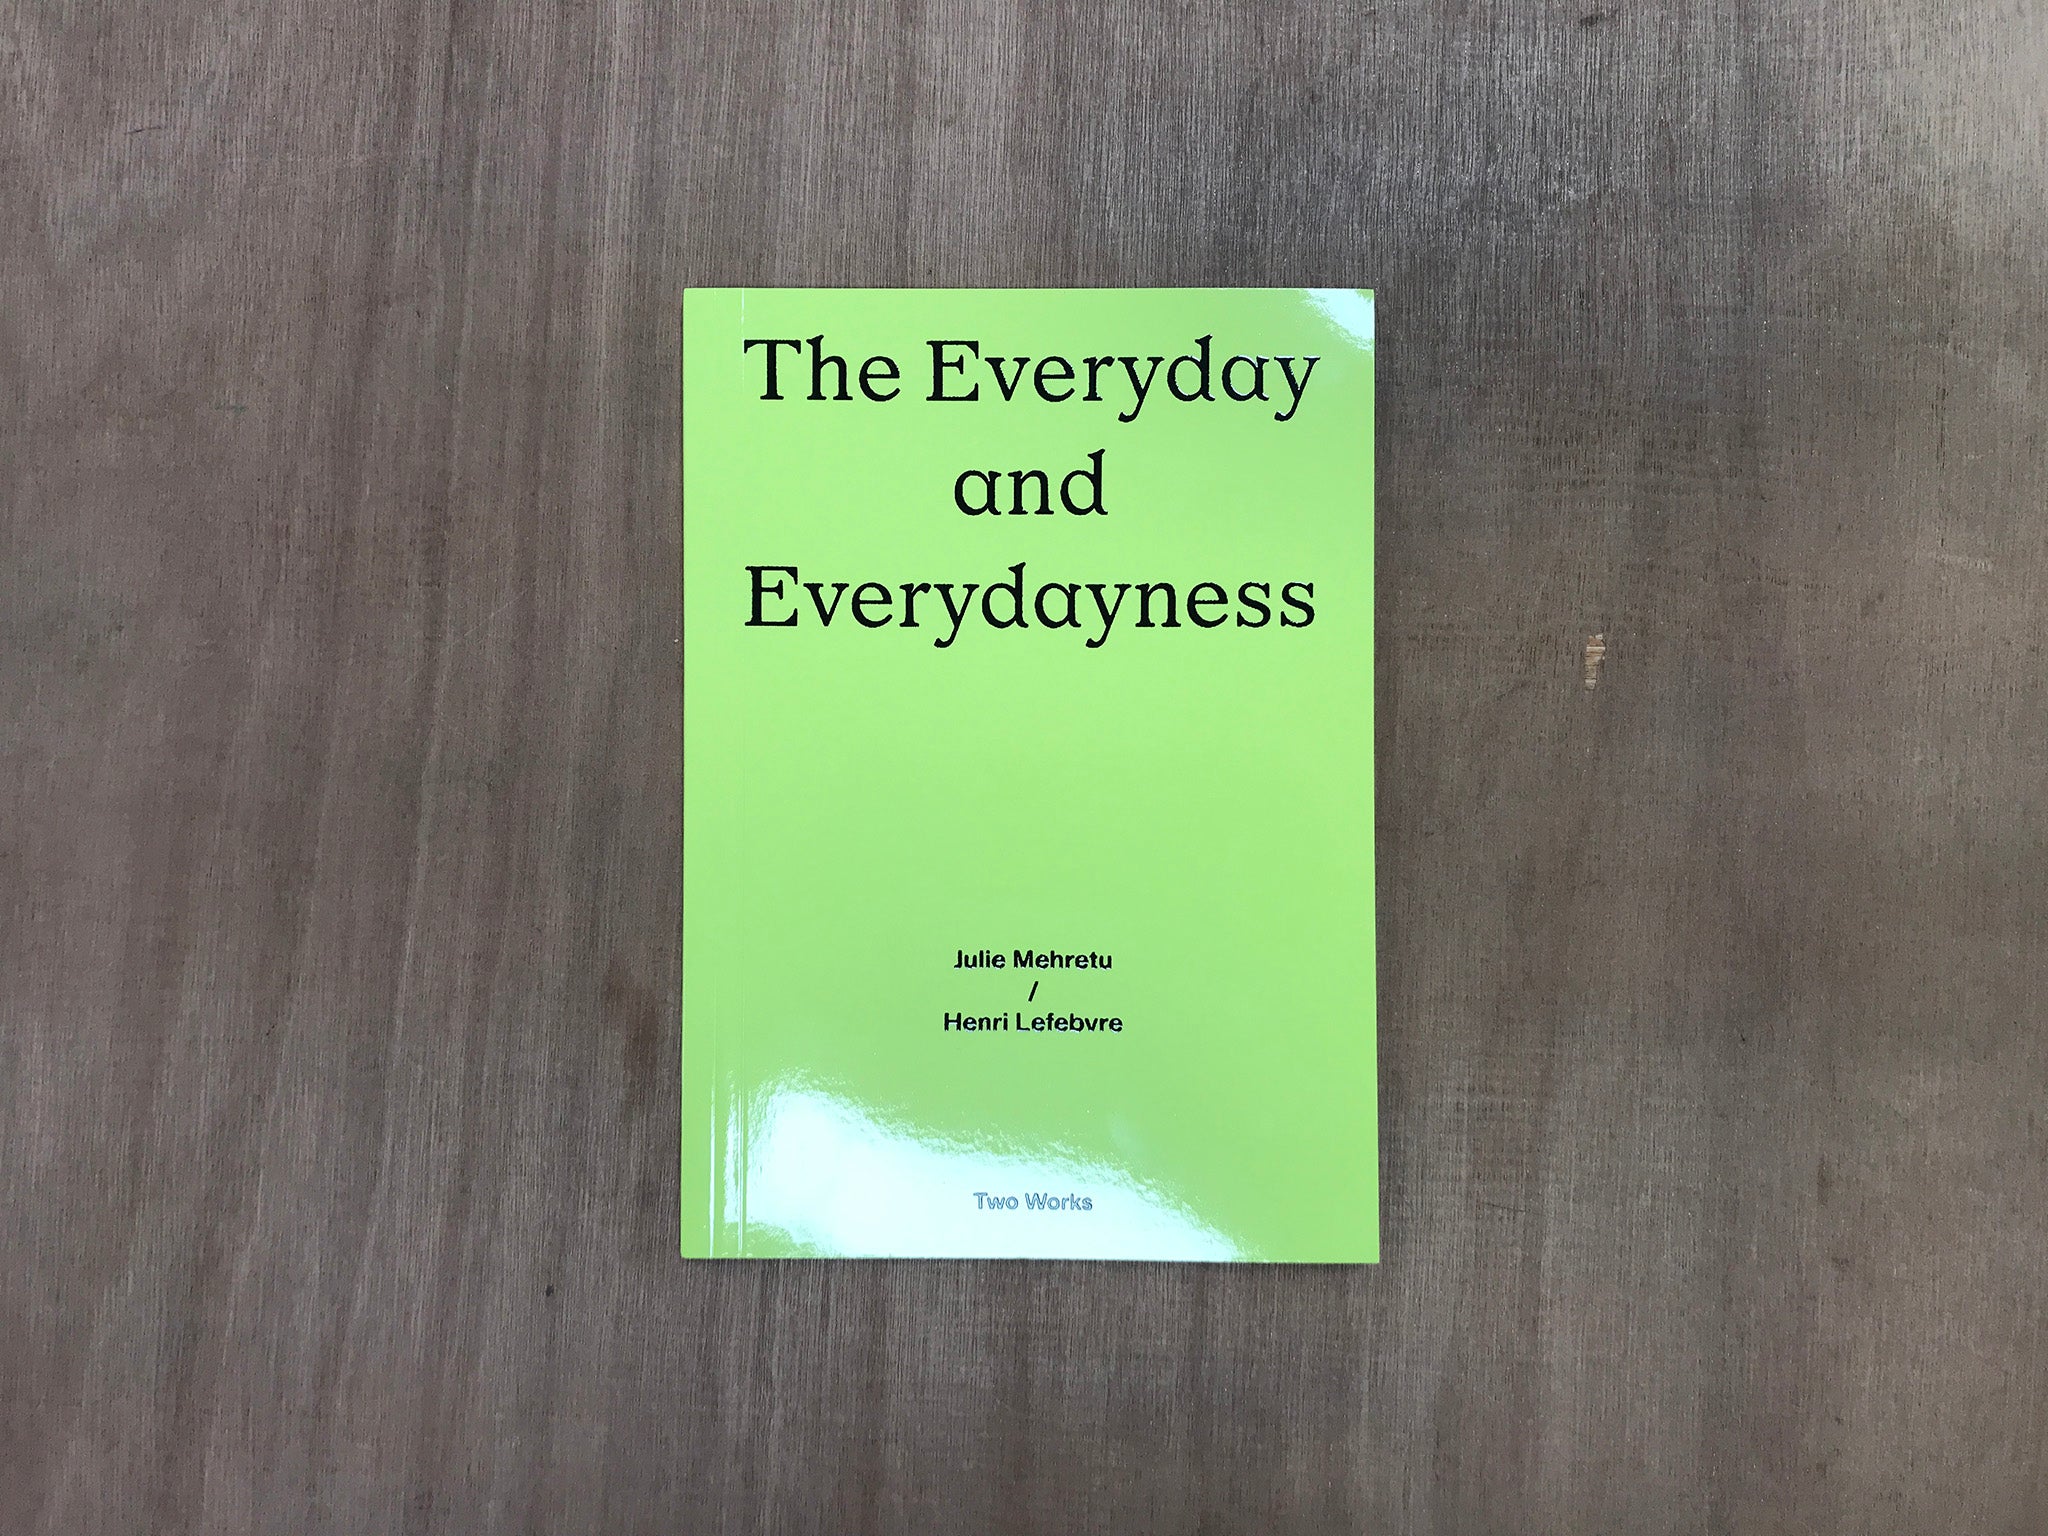 THE EVERYDAY AND EVERYDAYNESS by Julie Mehretu and Henri Lefebvre